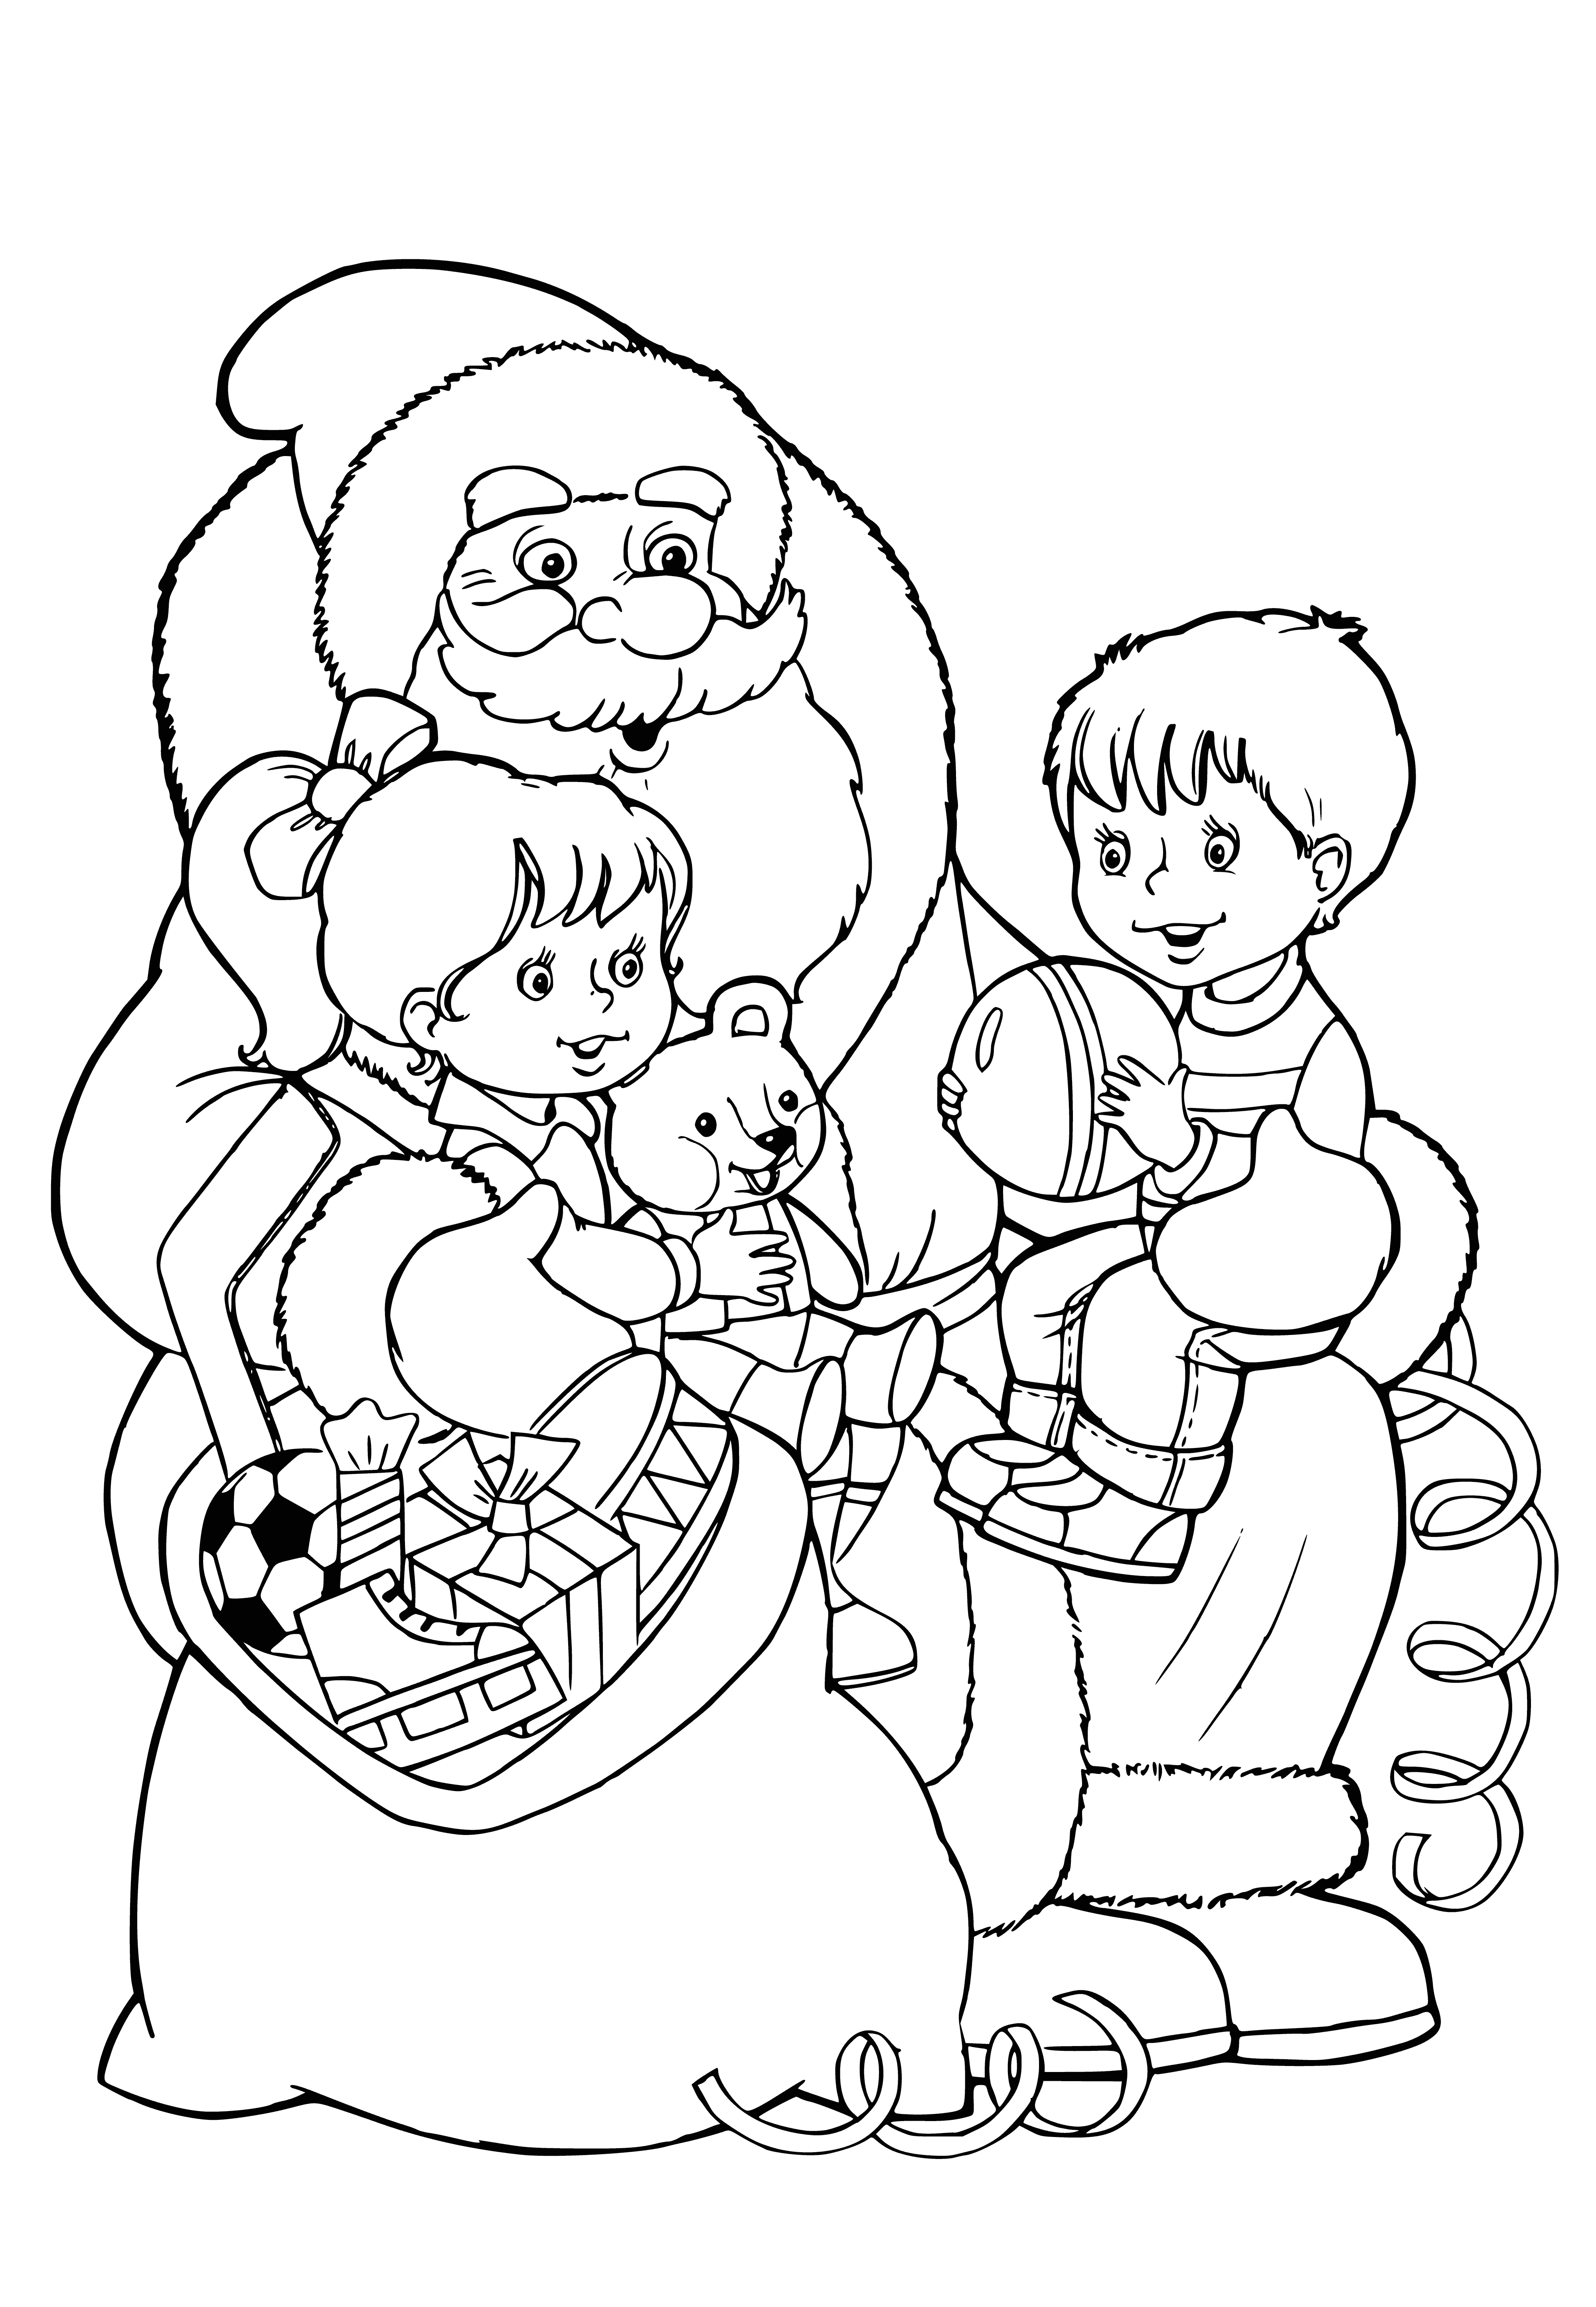 Children surround Santa in a coloring page, appear happy & excited. Santa has white beard & holds a sack of presents.